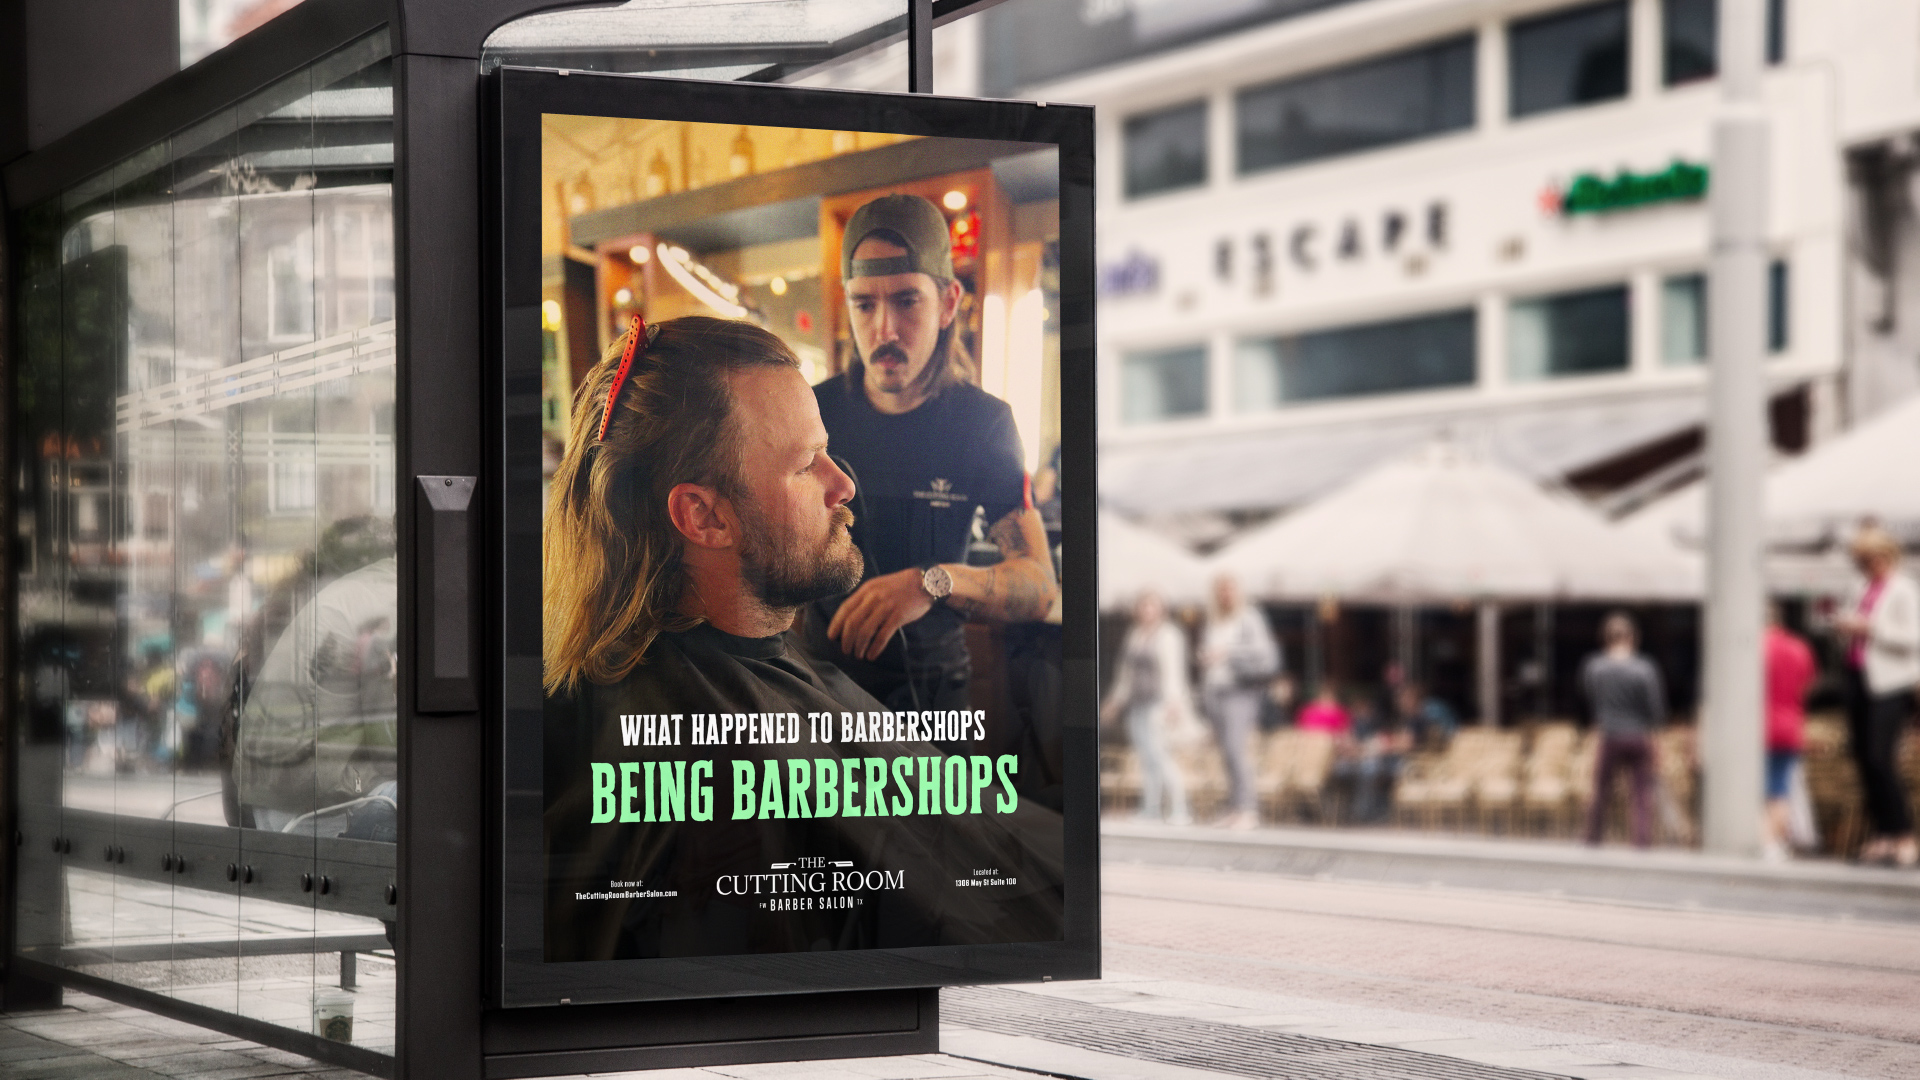 An ad shows a stylist giving someone a haircut with the text, “What happened to barbershops being barbershops.” The ad is featured at a bus stop along a busy street.